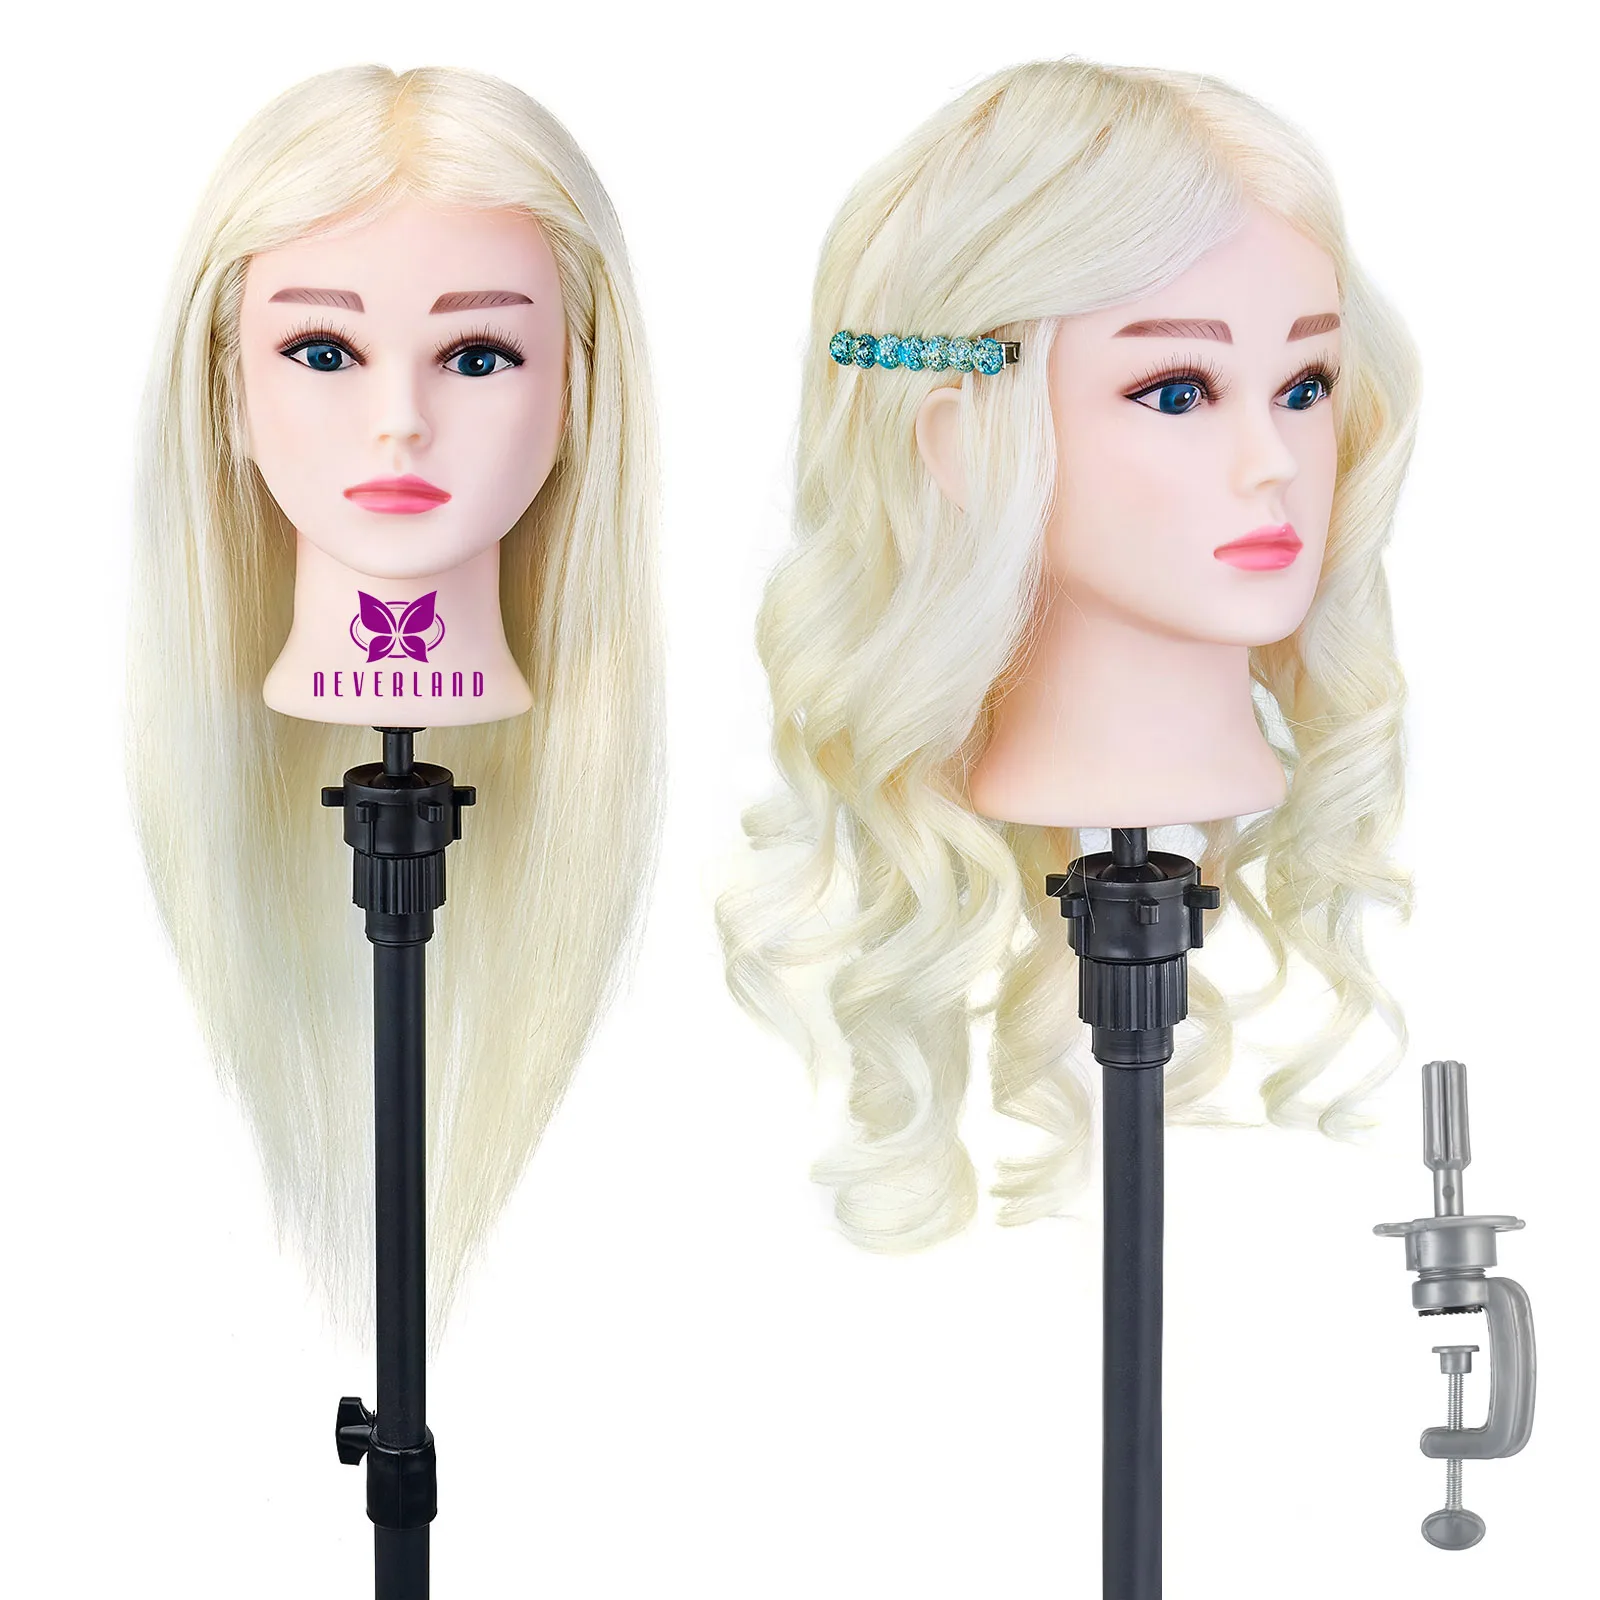 

100% Real Human Hair for Hairdressers Hairstyle Hairdressing Training Head Curling Dummy Doll Practice Mannequin Head with Stand